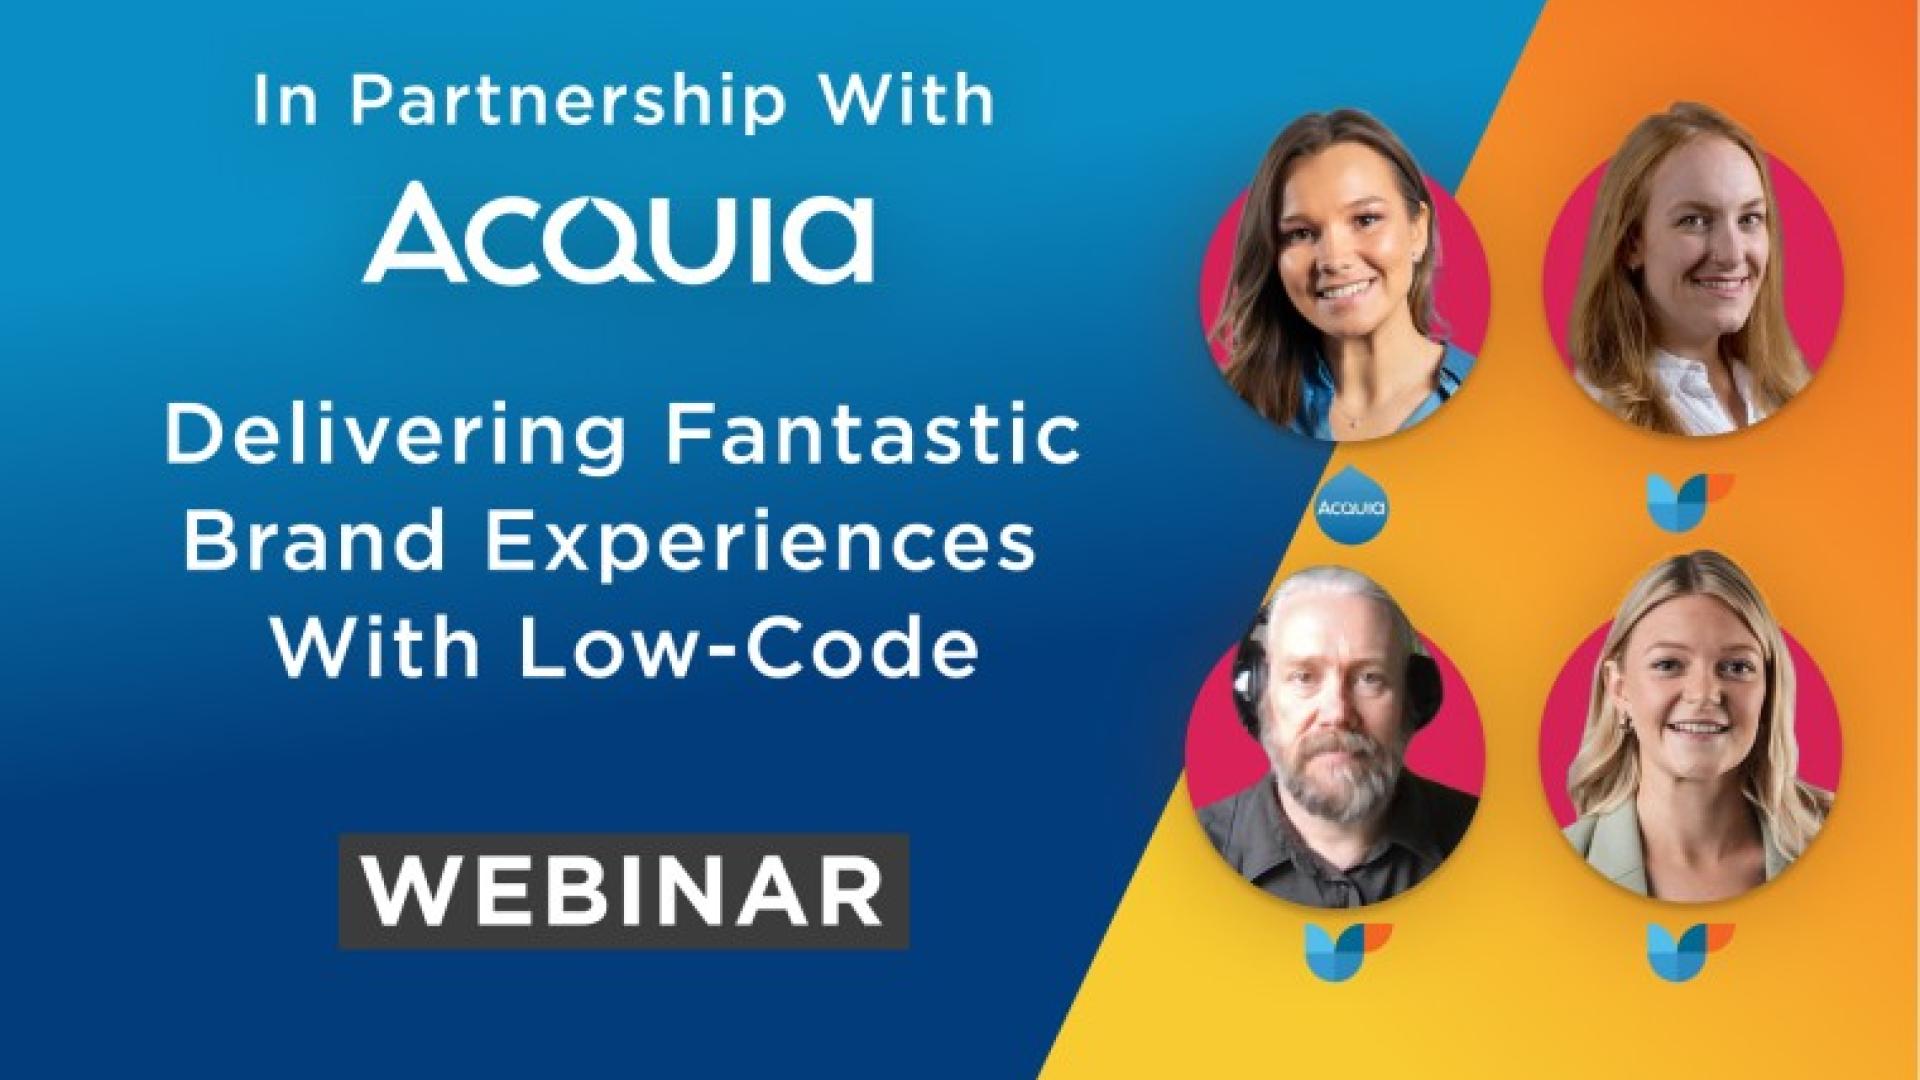 Delivering Fantastic Brand Experiences with Low-Code by Cyber-Duck and Acquia